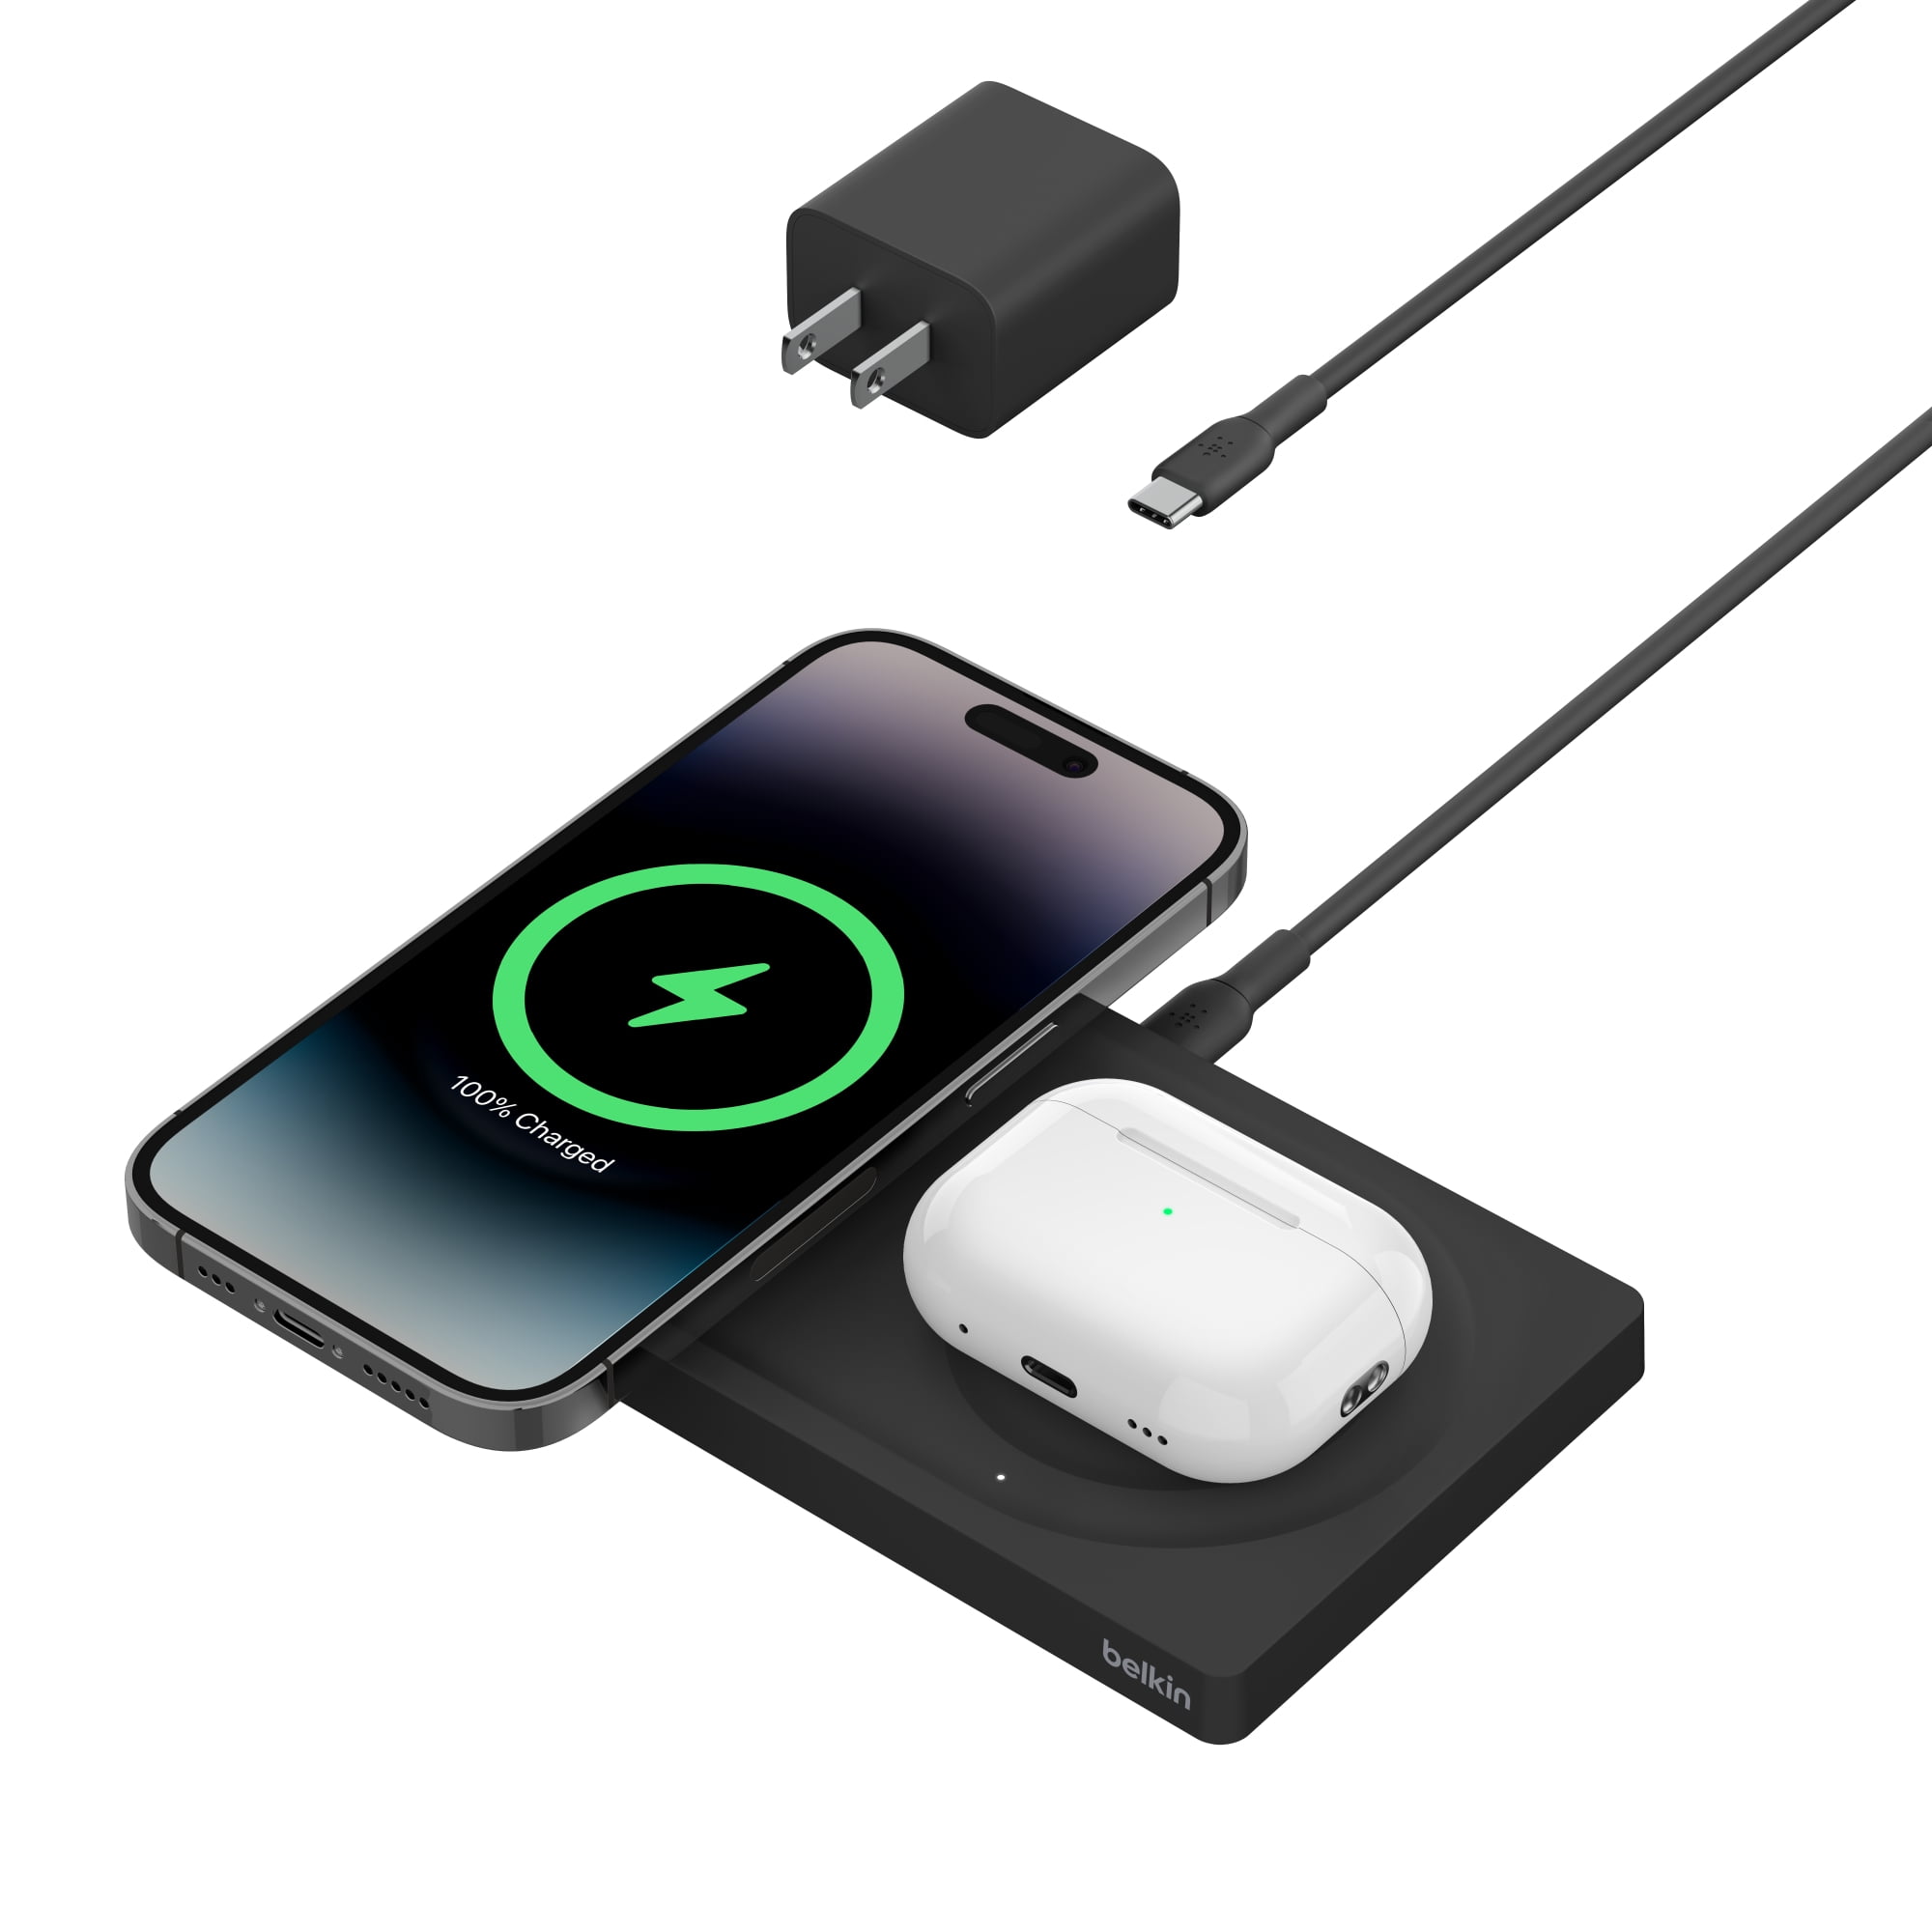 Belkin BoostCharge PRO 3-in-1 Wireless Charger with MagSafe for iPhone 13,  12 + Apple Watch + AirPods (Magnetically Charges iPhone 13 and 12 Models up